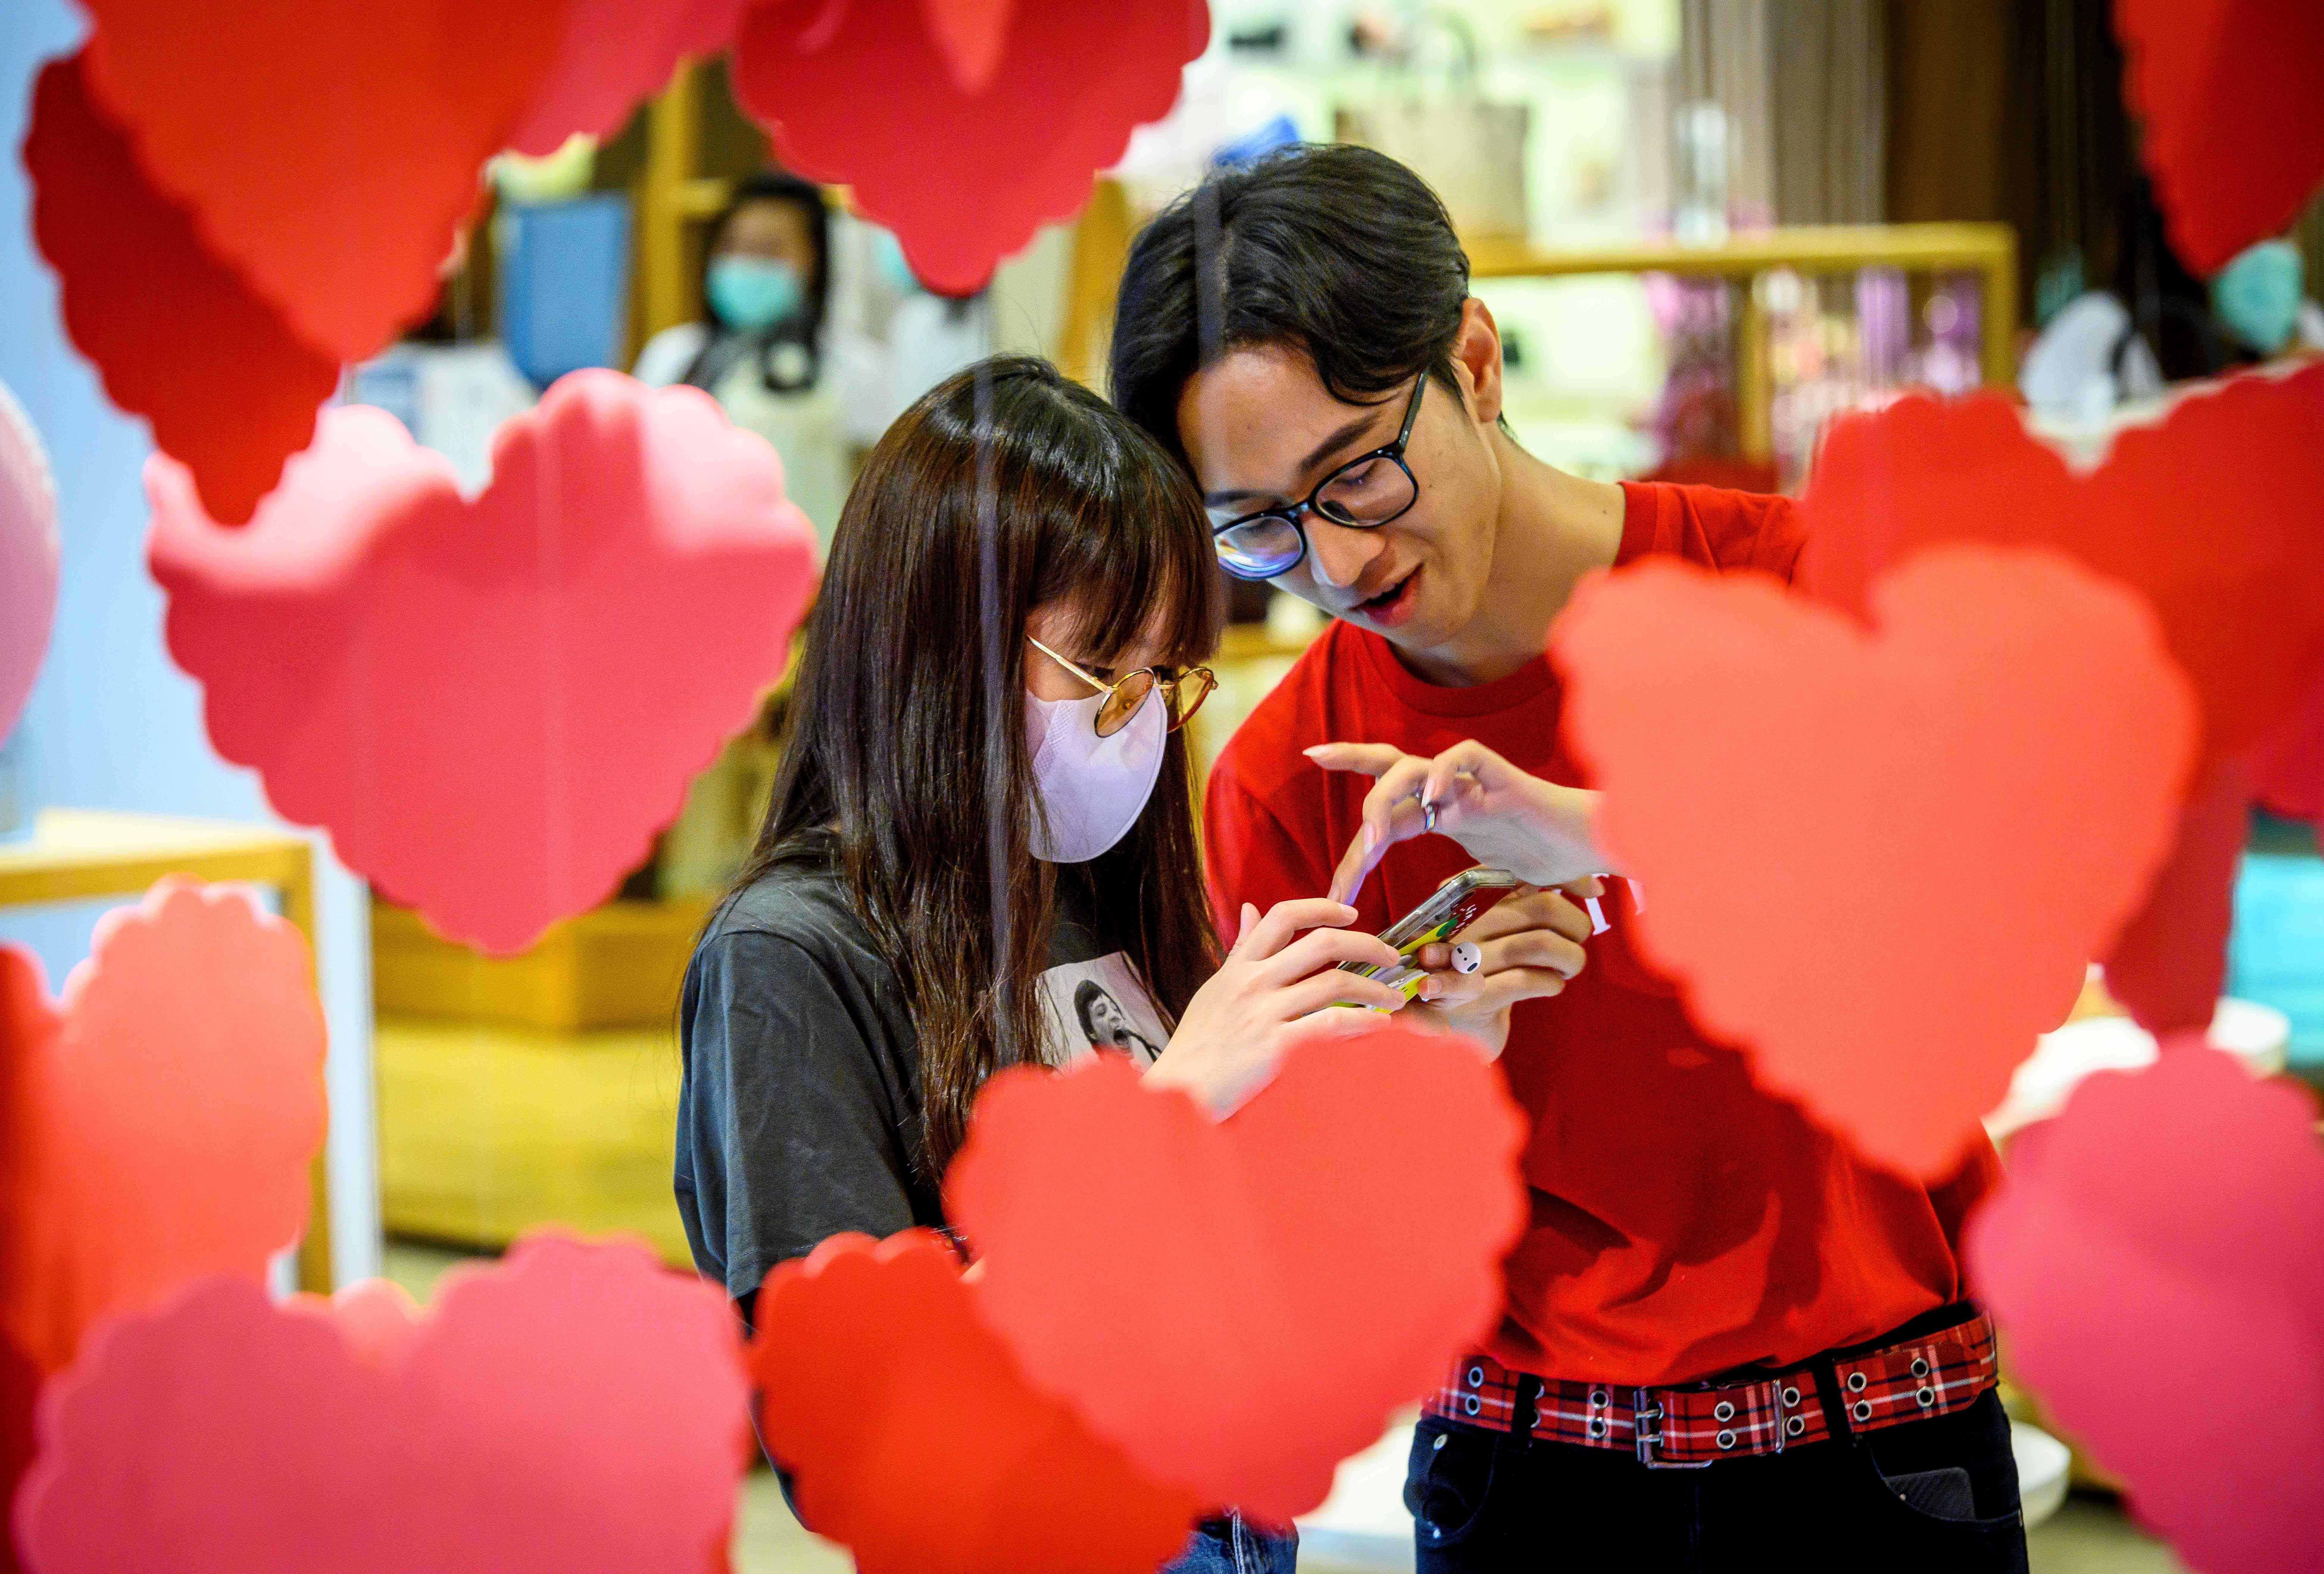 In this image, two people stand behind red cardboard hearts and one wears a face mask